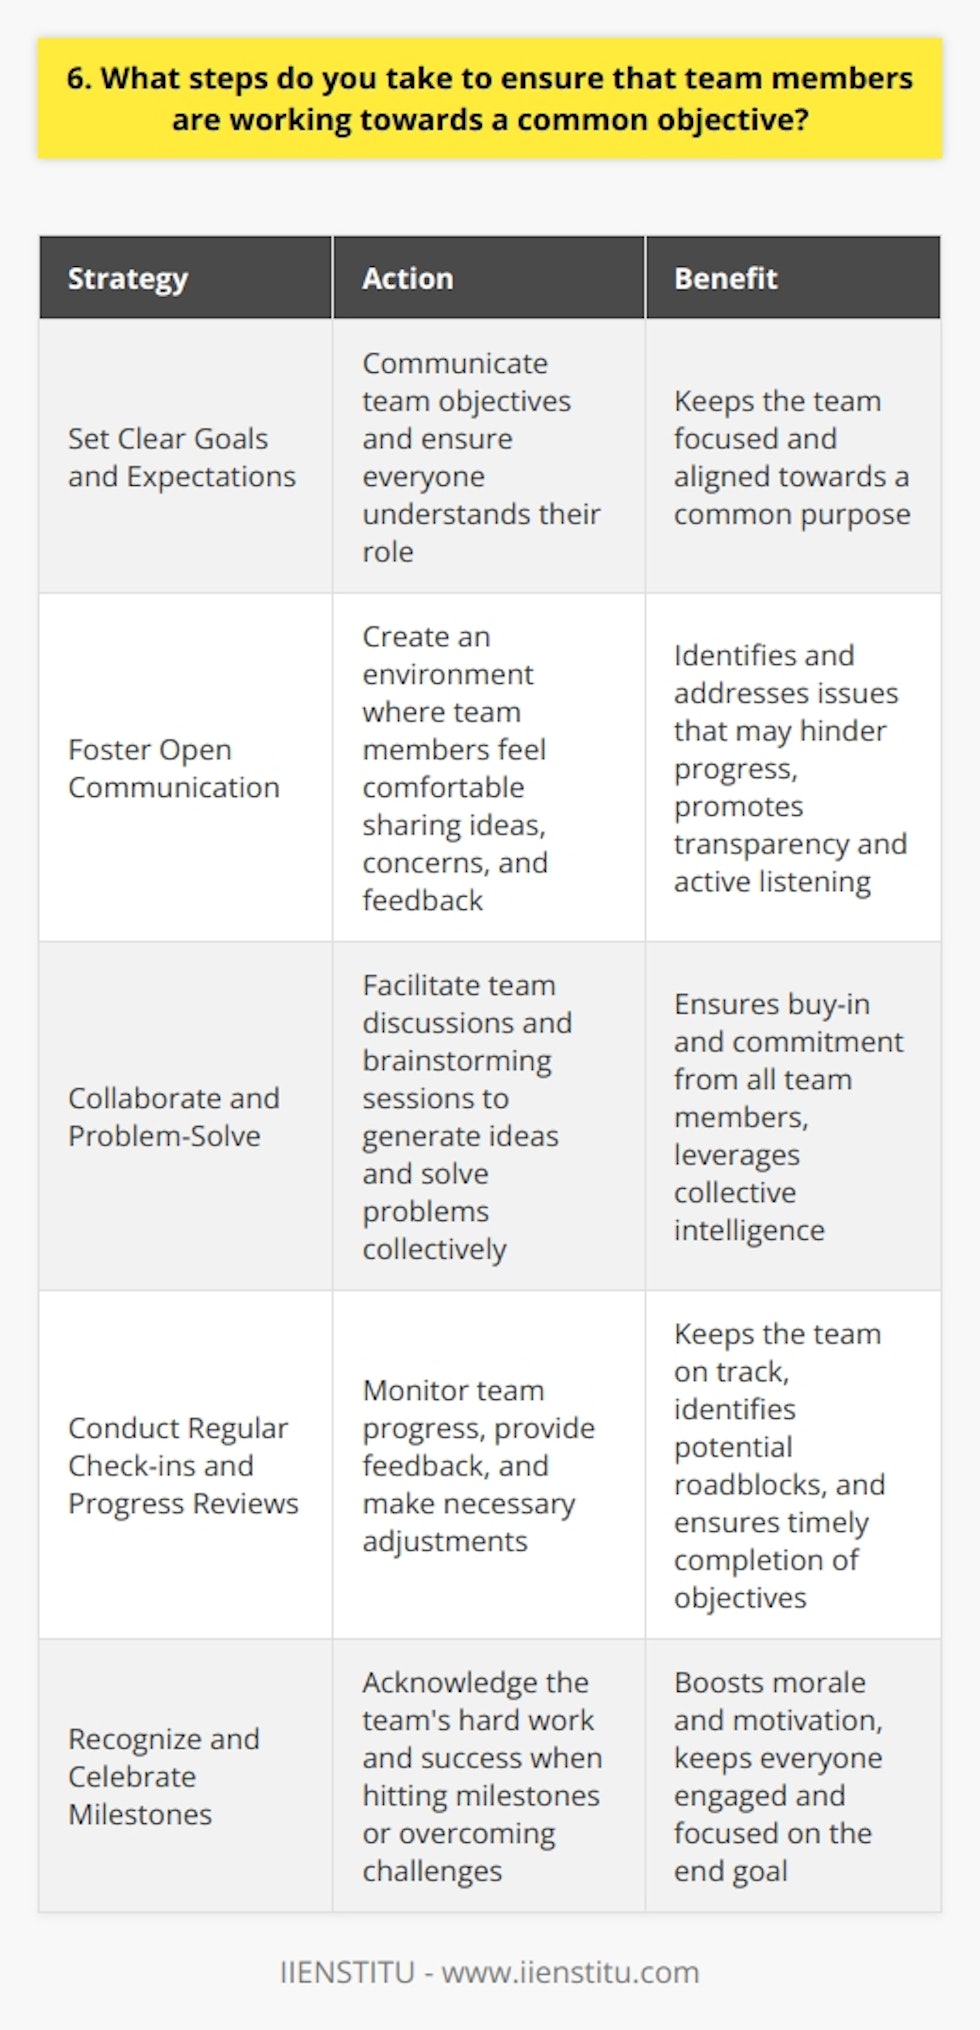 When leading a team, I believe in setting clear goals and expectations from the outset. I communicate the teams objectives and ensure everyone understands their role in achieving them. Regular check-ins and progress reviews help keep the team on track. Fostering Open Communication I encourage open communication within the team. I create an environment where team members feel comfortable sharing ideas, concerns, and feedback. By promoting transparency and active listening, I can identify and address any issues that may hinder progress towards our common goal. Collaborating and Problem-Solving Collaboration is key to achieving a shared objective. I facilitate team discussions and brainstorming sessions to generate ideas and solve problems collectively. By involving everyone in the decision-making process, I ensure buy-in and commitment from all team members. Recognizing and Celebrating Milestones I believe in recognizing and celebrating the teams achievements along the way. When we hit milestones or overcome challenges, I make sure to acknowledge the teams hard work and success. This boosts morale and motivation, keeping everyone engaged and focused on the end goal. Ultimately, ensuring that team members work towards a common objective requires consistent communication, collaboration, and a shared sense of purpose. By setting clear expectations, fostering open dialogue, and recognizing progress, I can effectively lead my team to success.